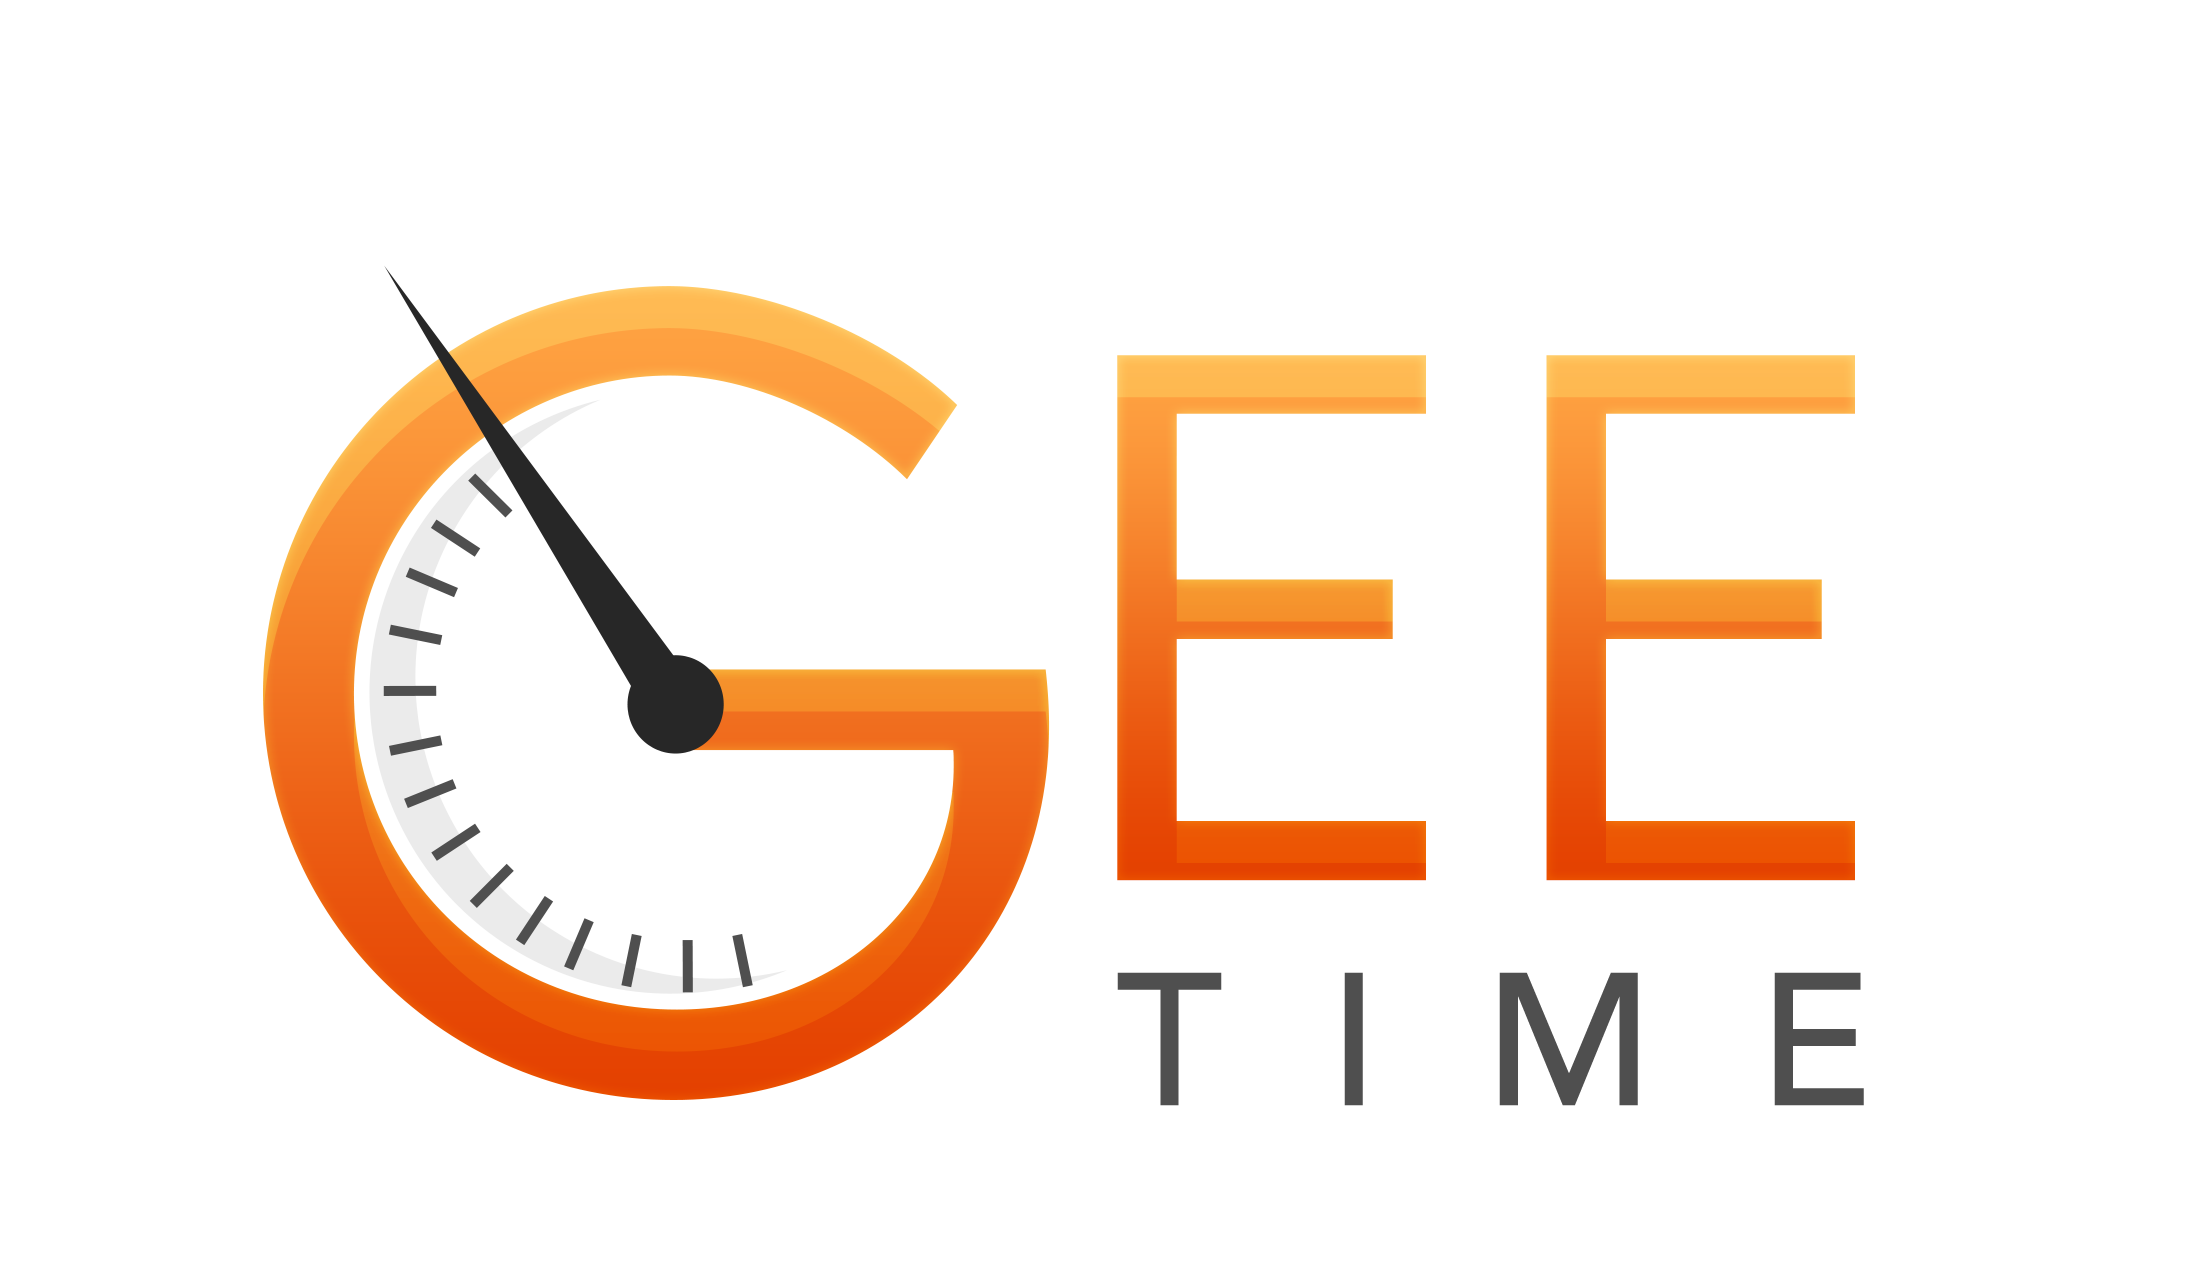 Gee-time